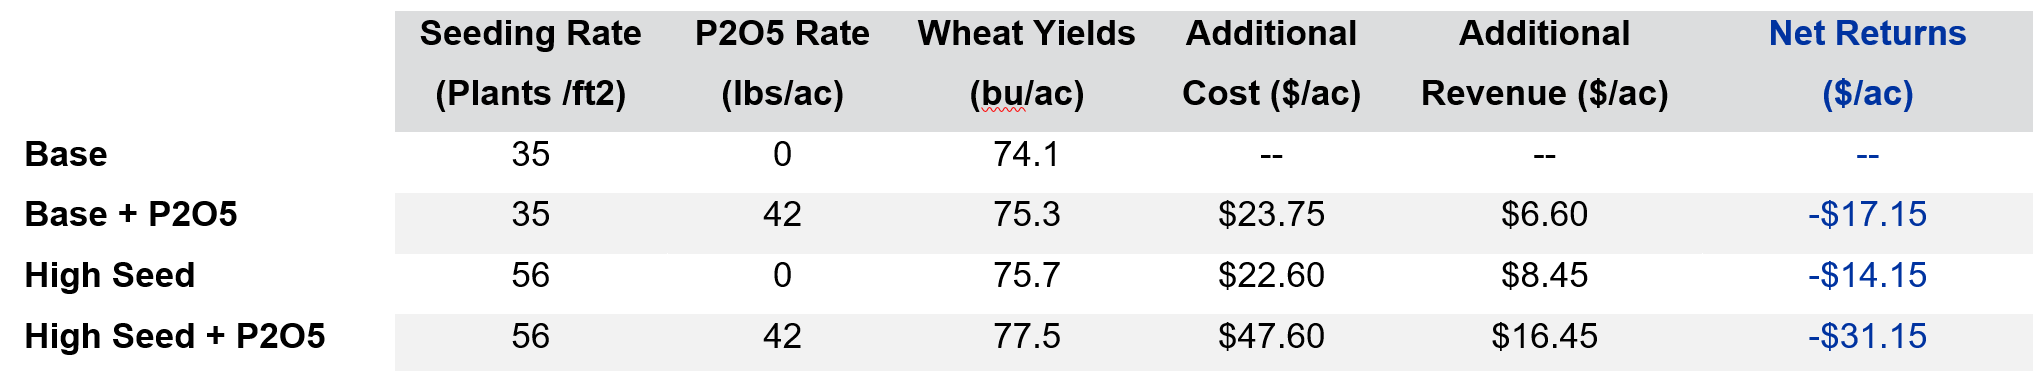 Table of yields and economic returns for applying phosphorous (P2O5) and an increased seeding rate for winter wheat in Kentucky as compared to UK’s recommended rates (Base)